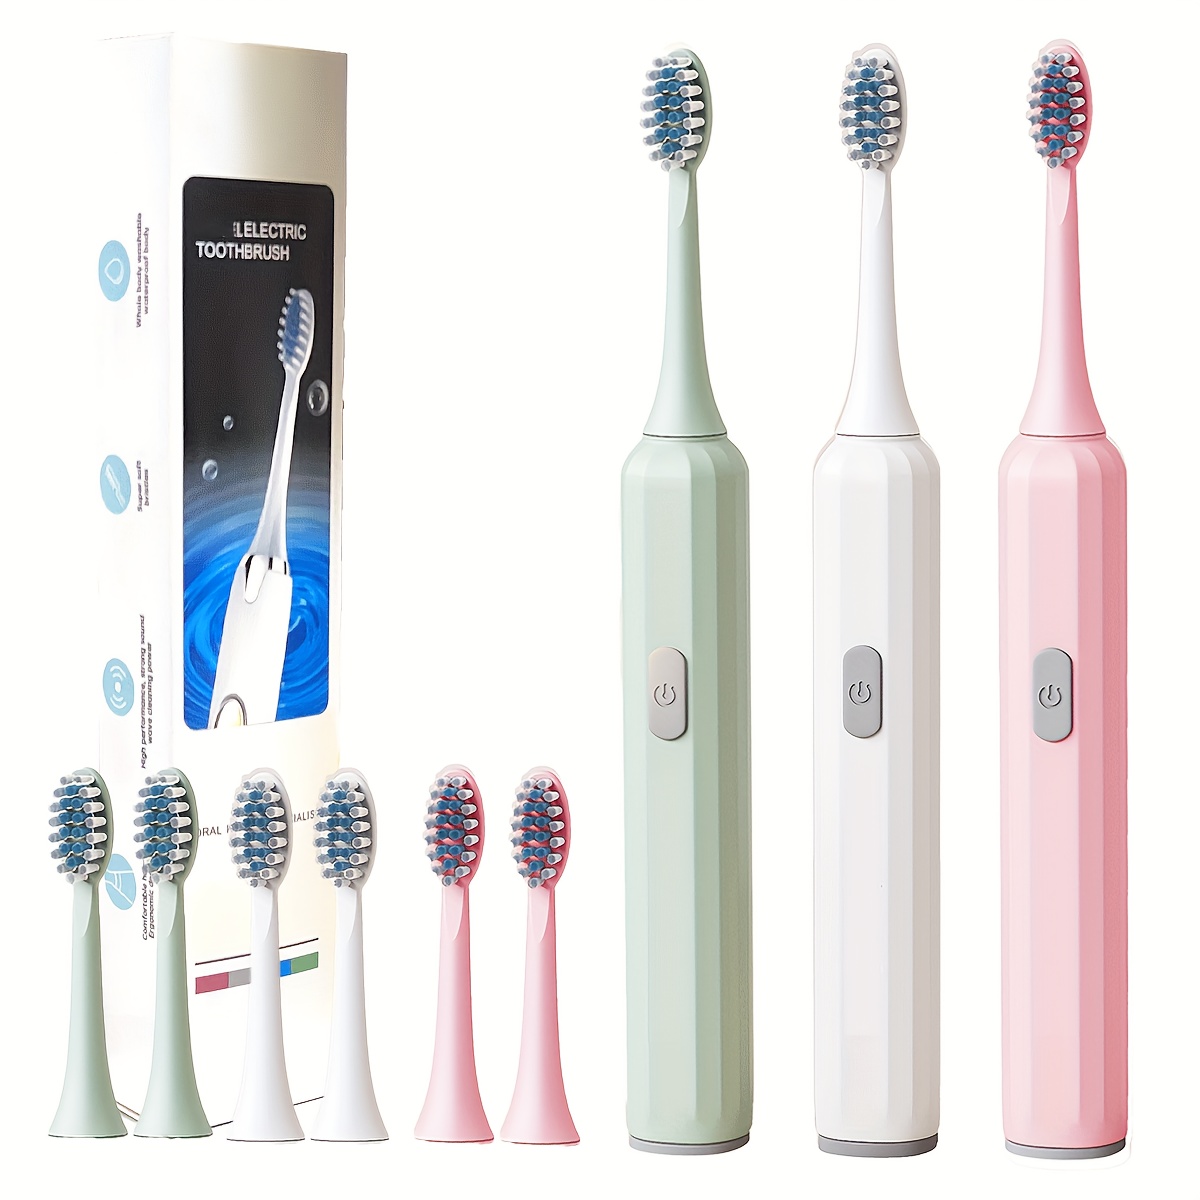 

Trendy Portable Aa Battery Electric Toothbrush, Oral Hygiene, Unisex, Effectively Cleans Teeth And Gums With 7 Toothbrush Heads Electric Toothbrush, Extra Soft Toothbrush For Sensitive Gums And Teeth